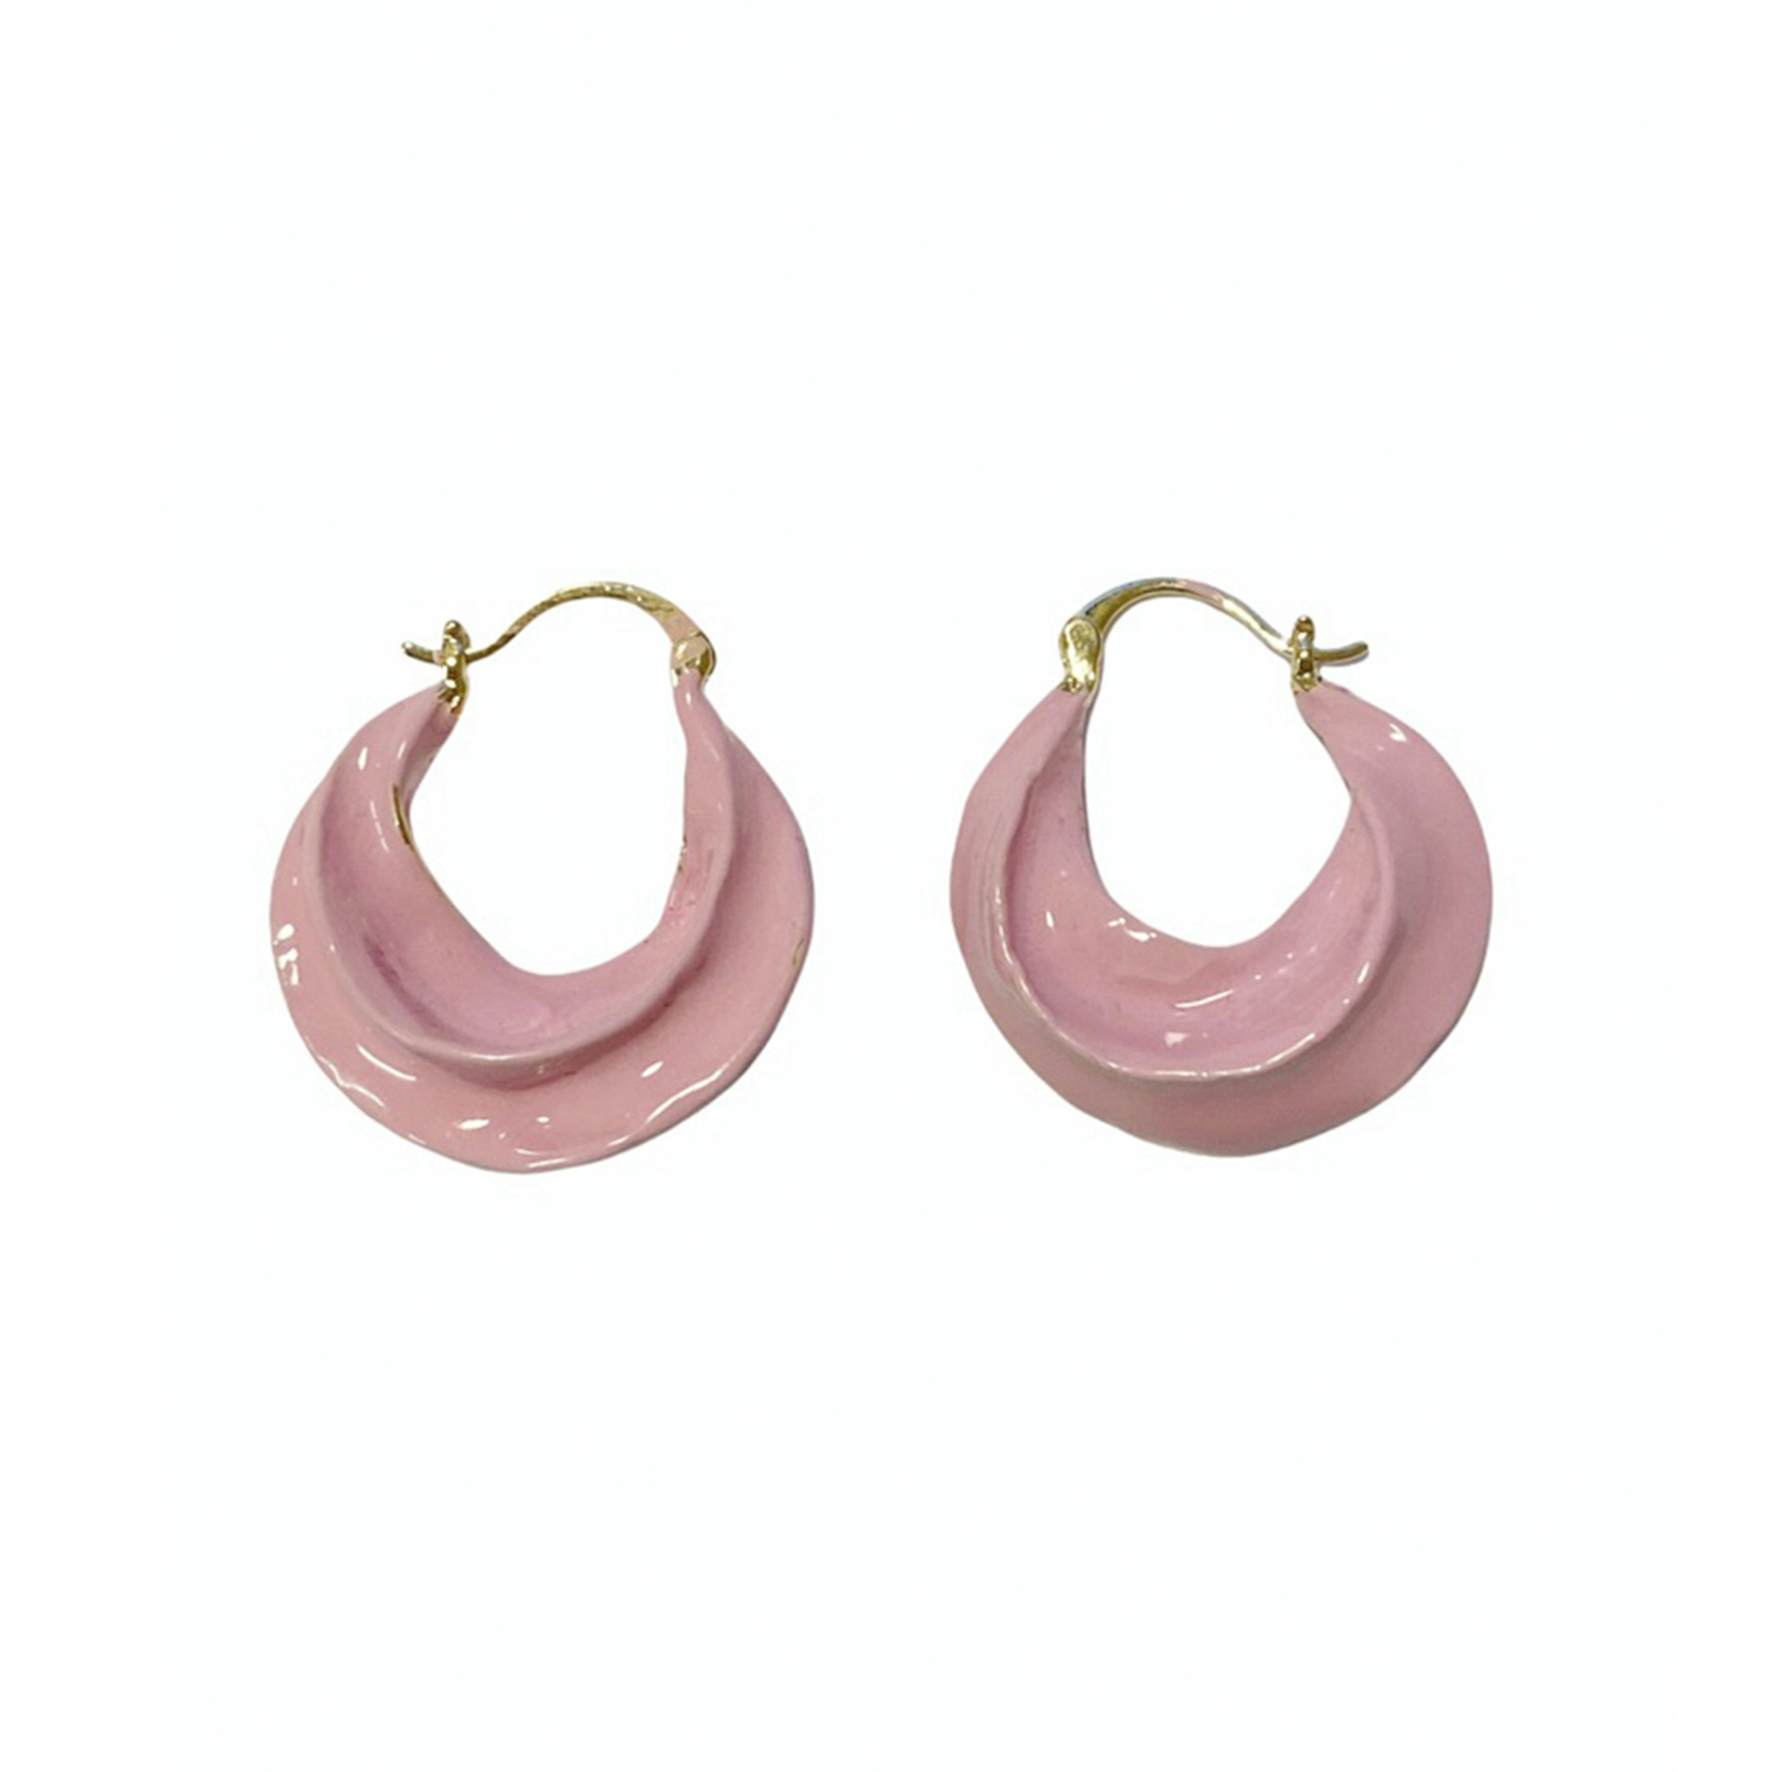 Africa Enamel Earrings Baby Pink from Pico in Goldplated-Silver Sterling 925